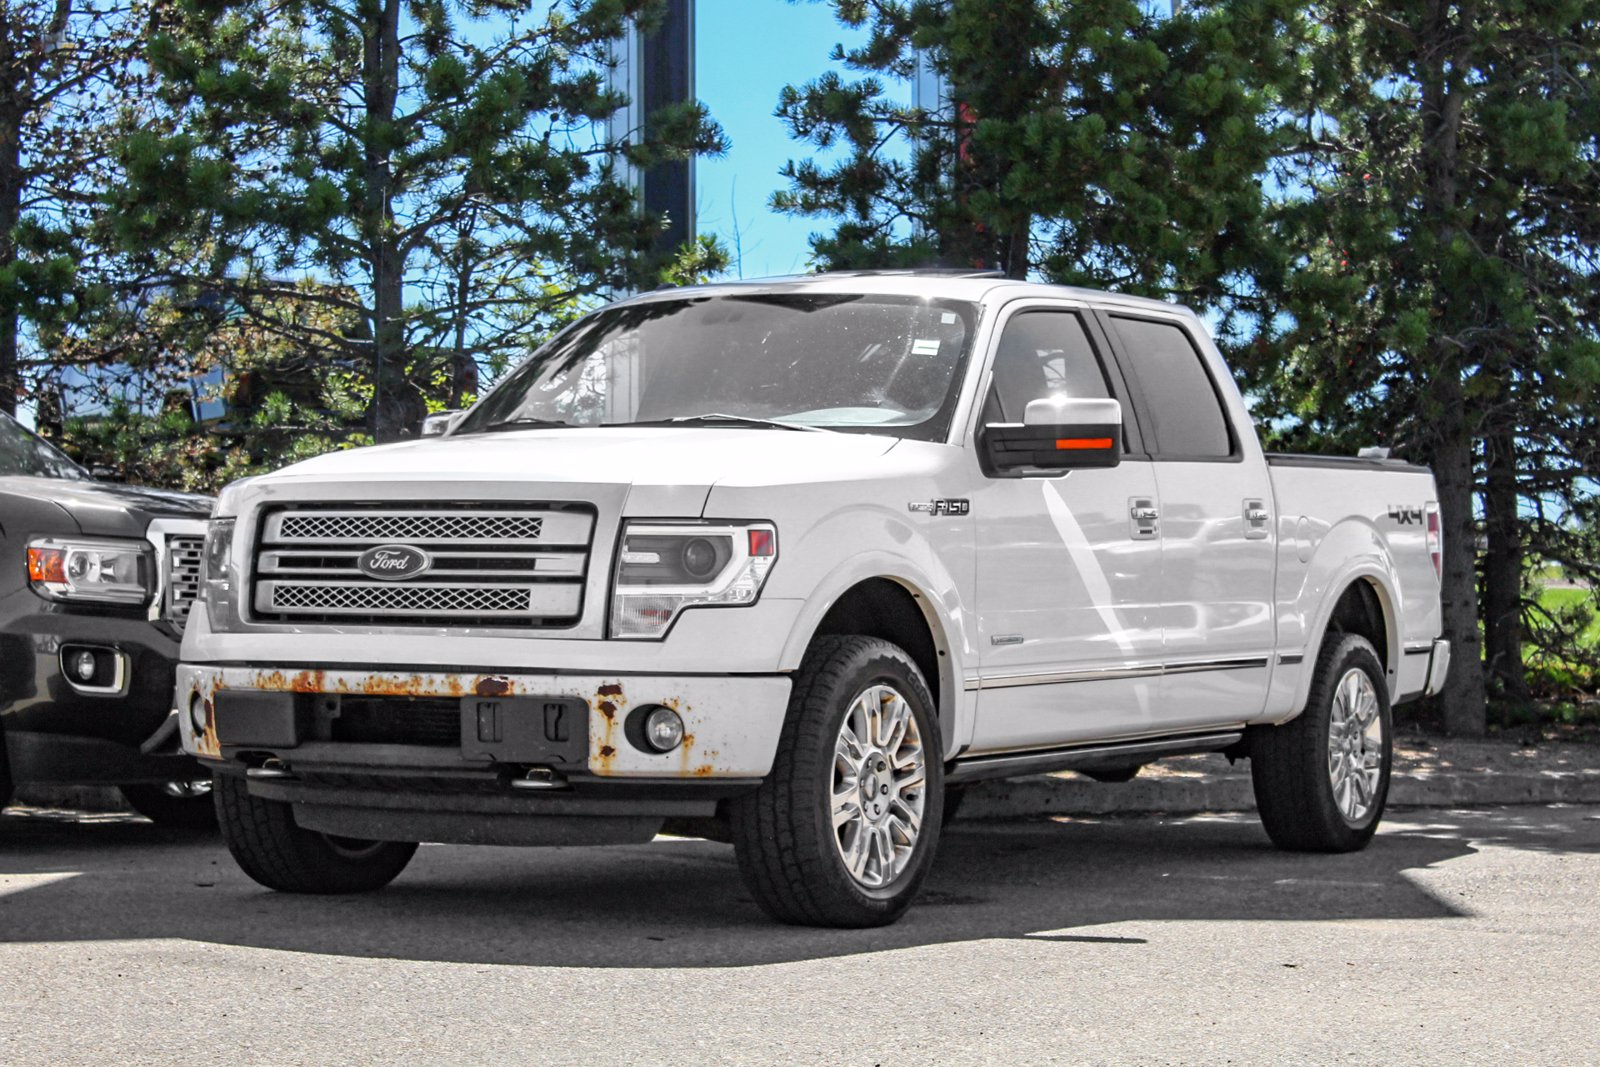 Pre-Owned 2013 Ford F-150 Platinum 3.5L 4WD Crew Cab Pickup